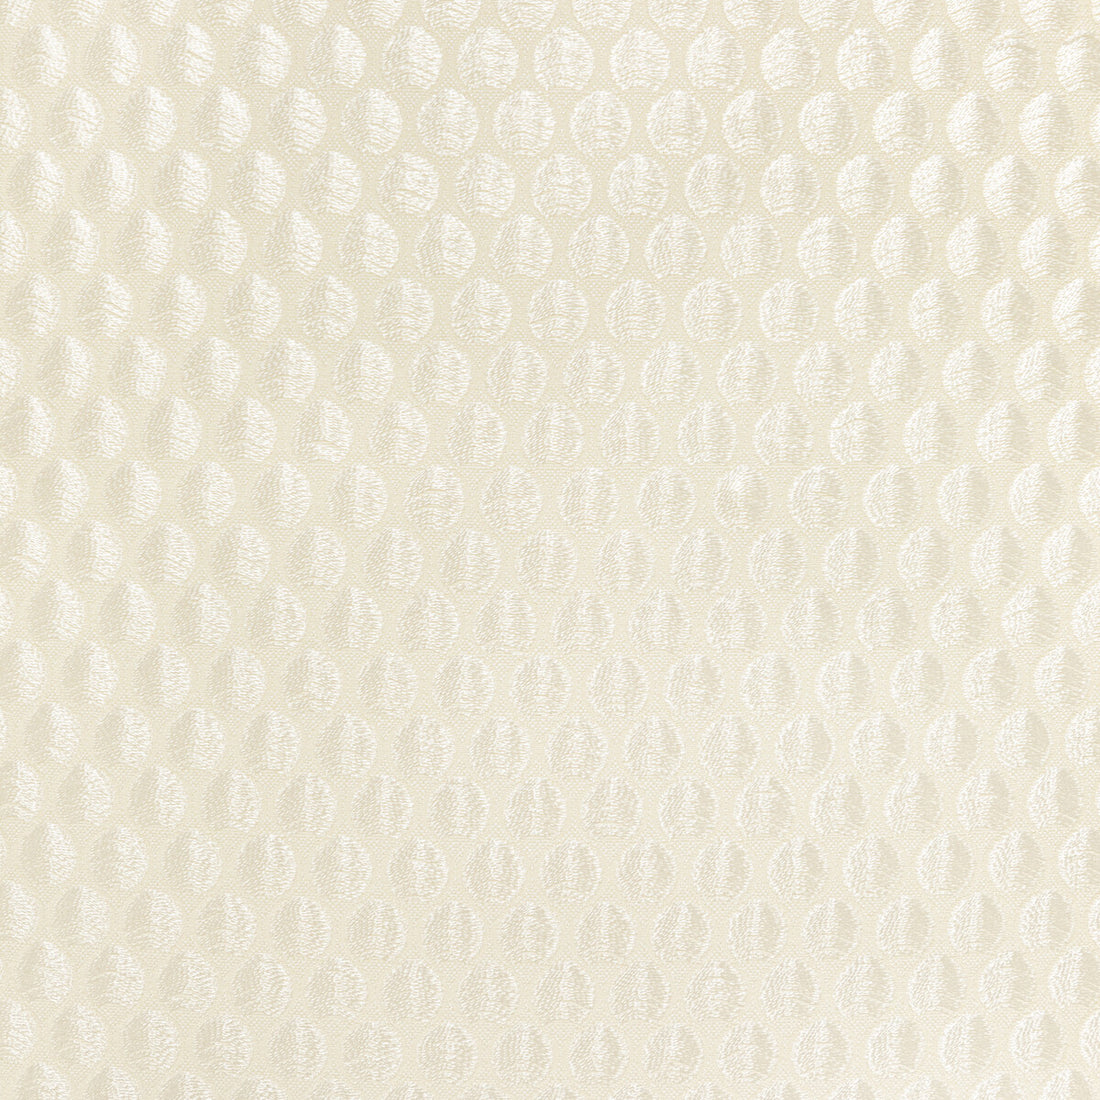 Perfect Catch fabric in cream color - pattern 4950.16.0 - by Kravet Couture in the Modern Luxe Silk Luster collection